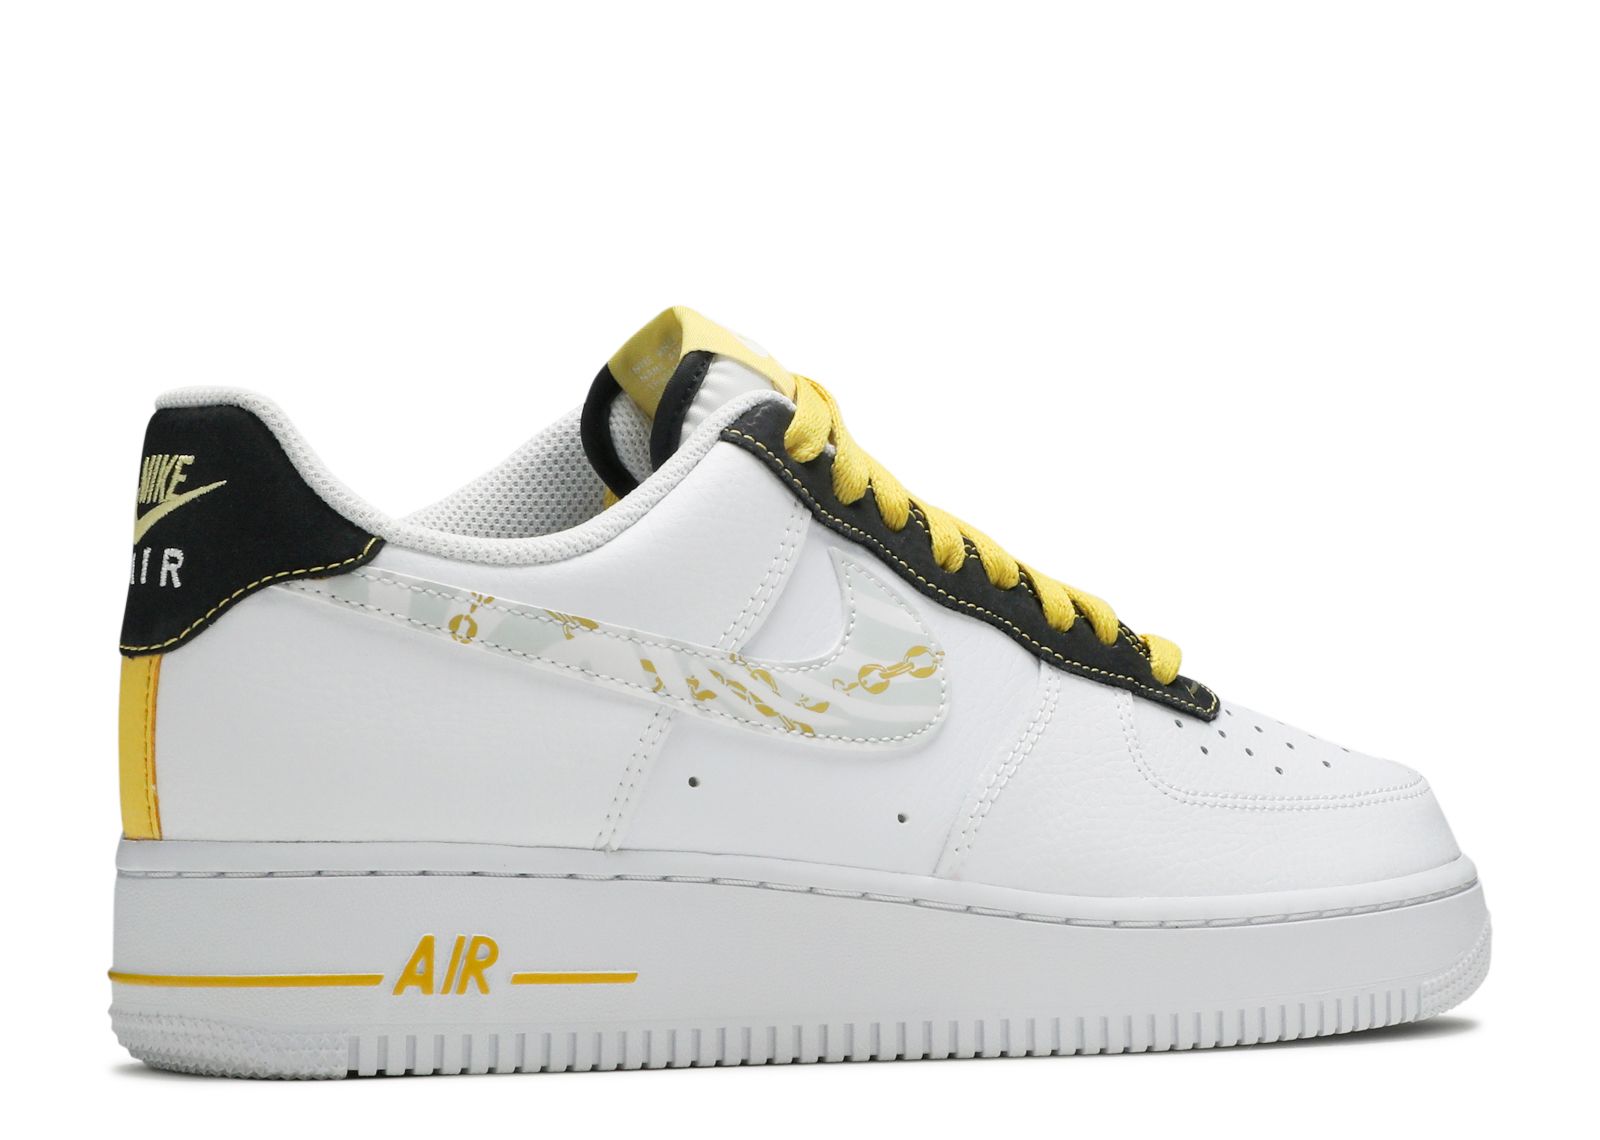 Nike Air Force 1 07 LV8 Links Zebra Print DH5480-100 from 75,00 €